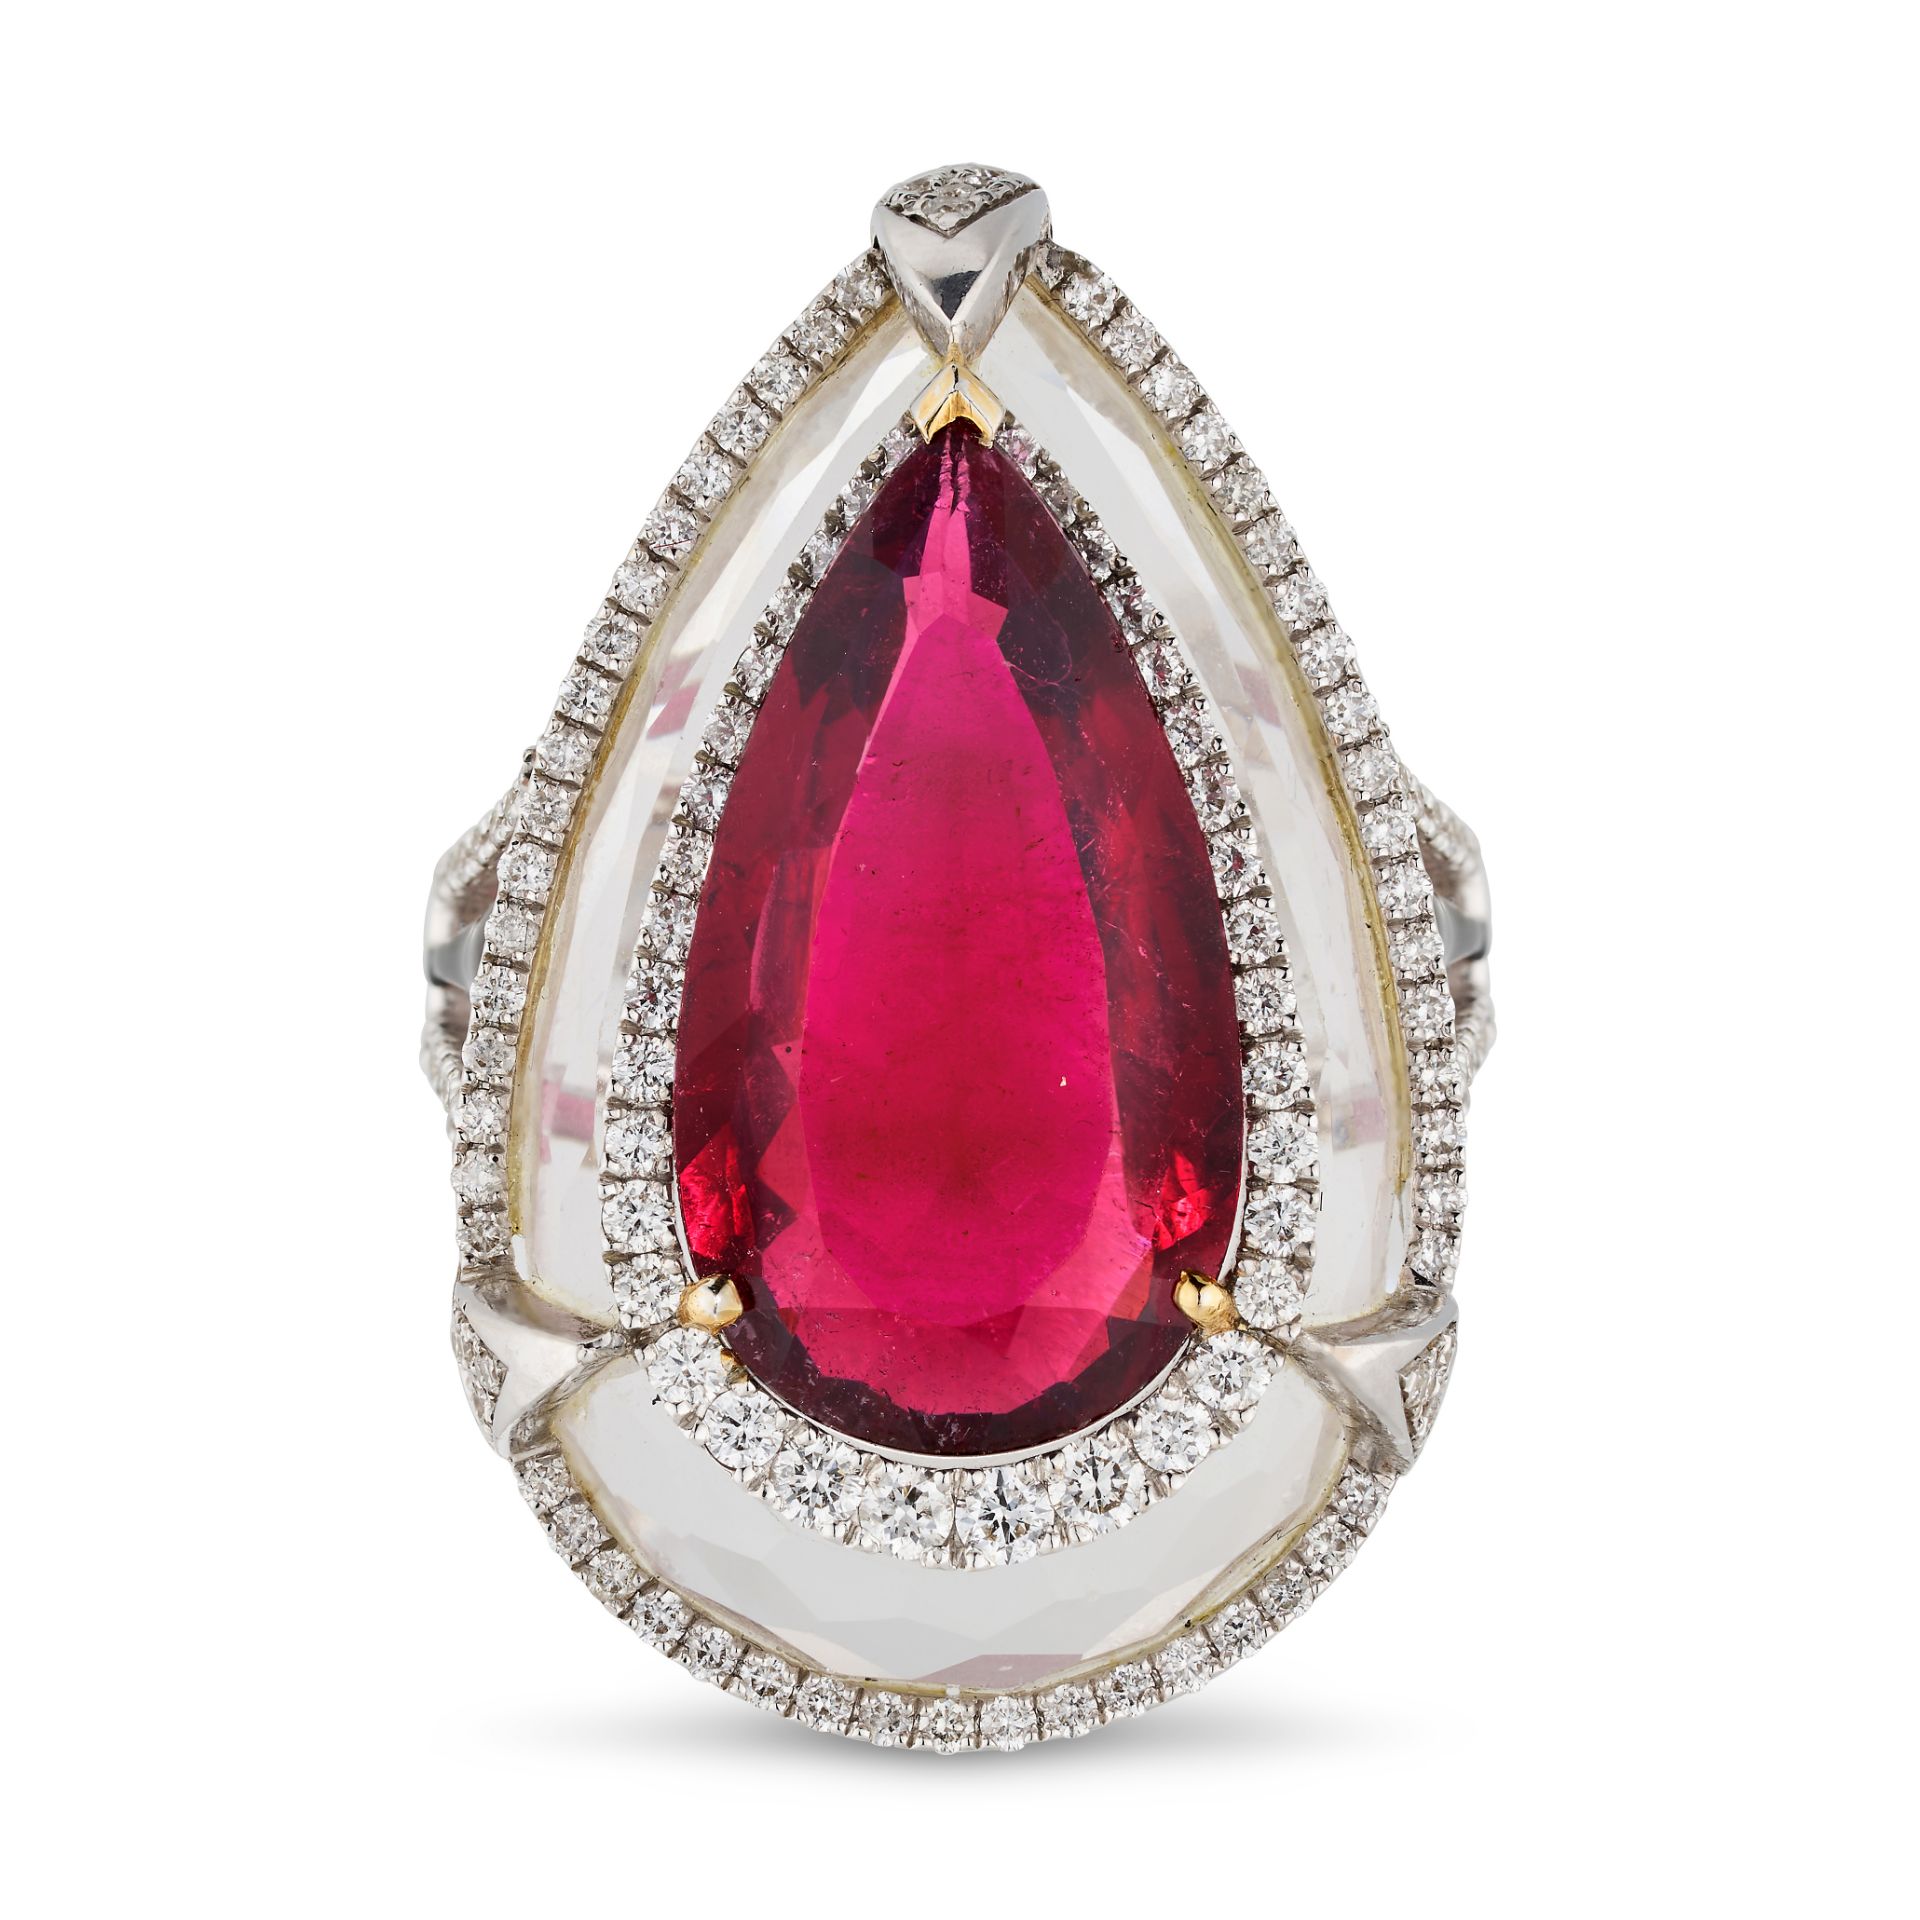 A RUBELLITE TOURMALINE, ROCK CRYSTAL AND DIAMOND DRESS RING in 18ct white gold, comprising a face... - Image 3 of 4